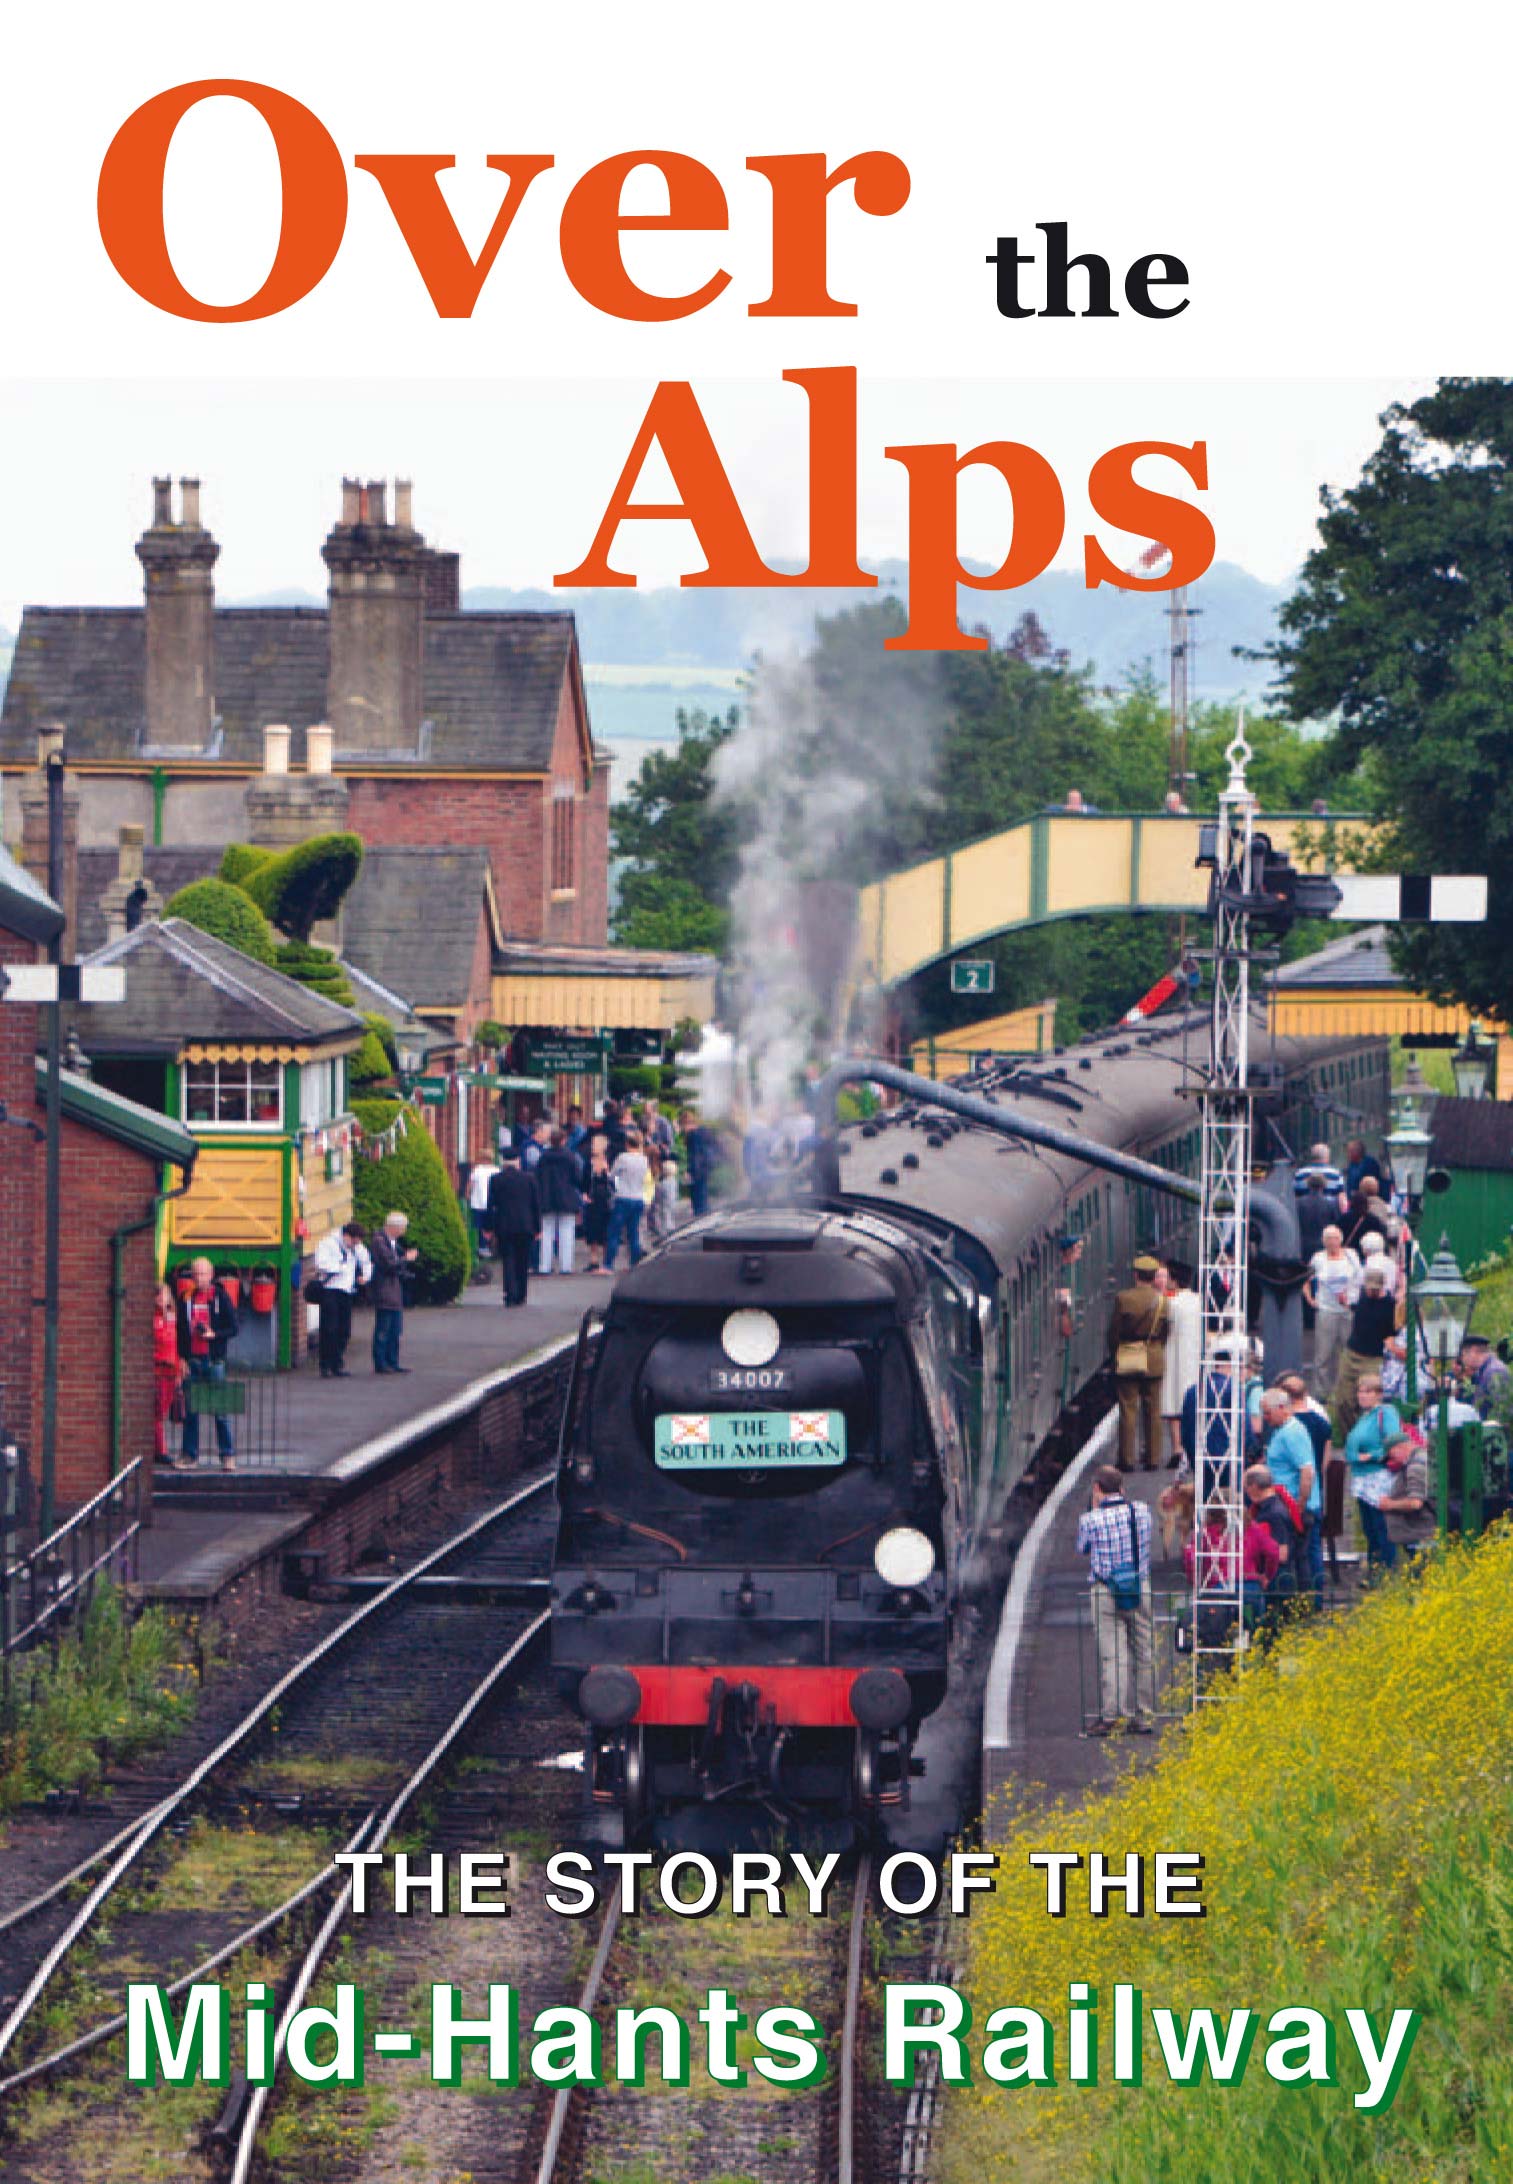 DVD ‘Over the Alps’ – The Story of the Mid-Hants Railway